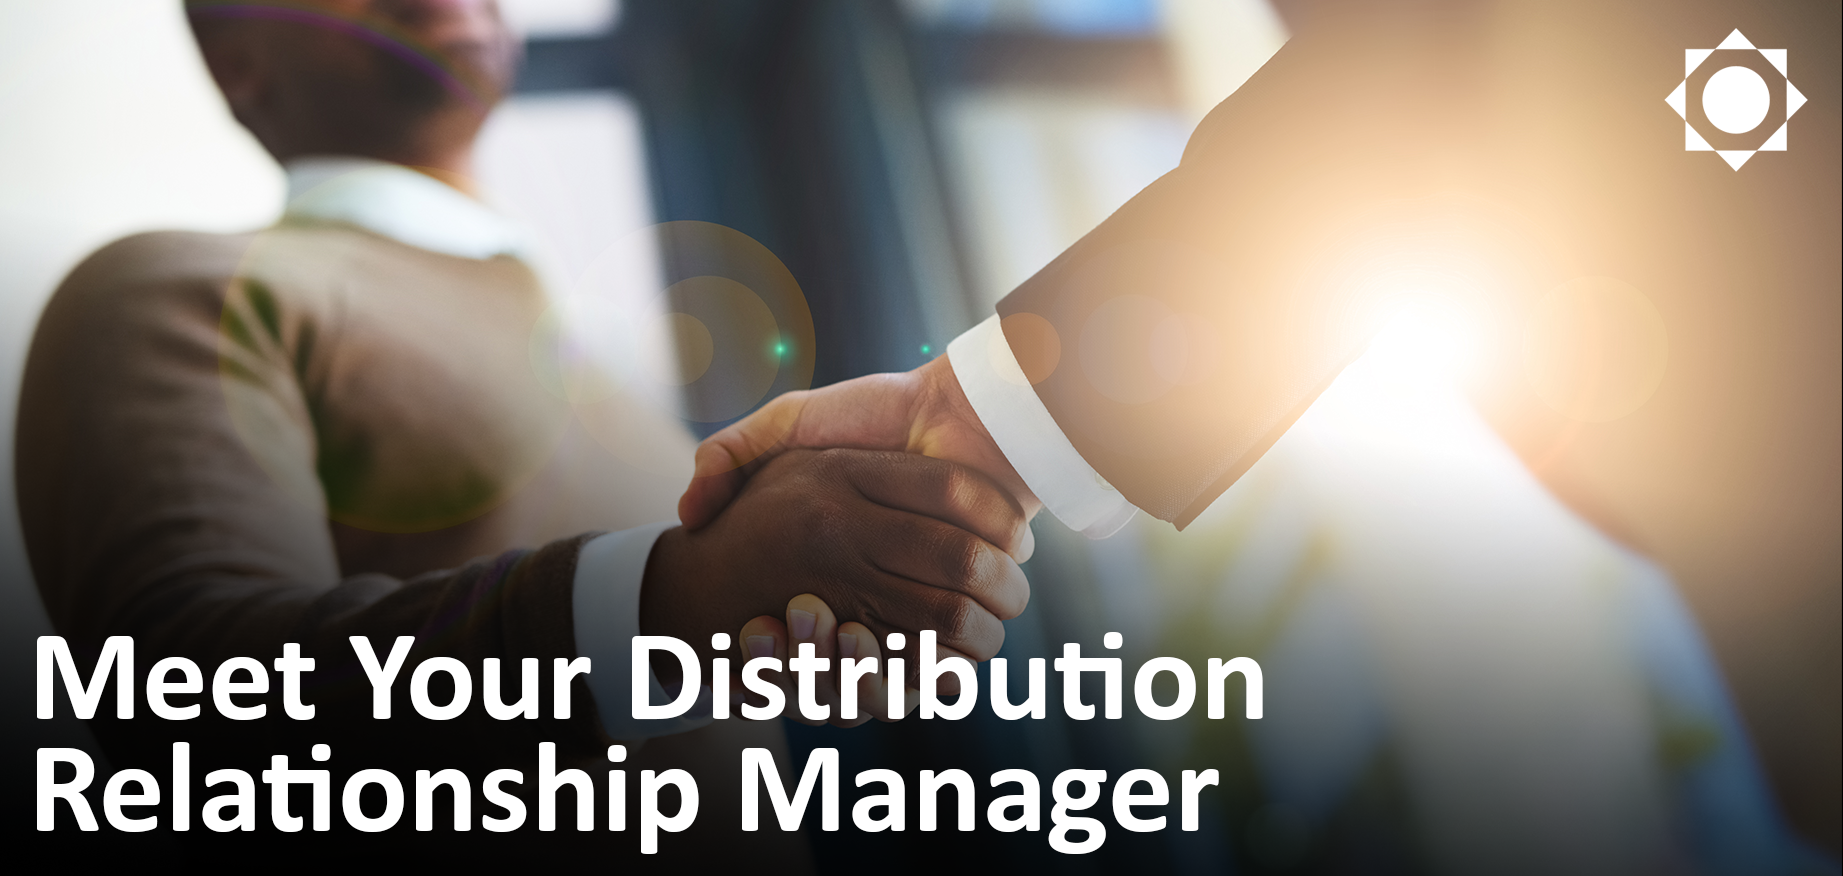 Meet Your Distribution Relationship Manager